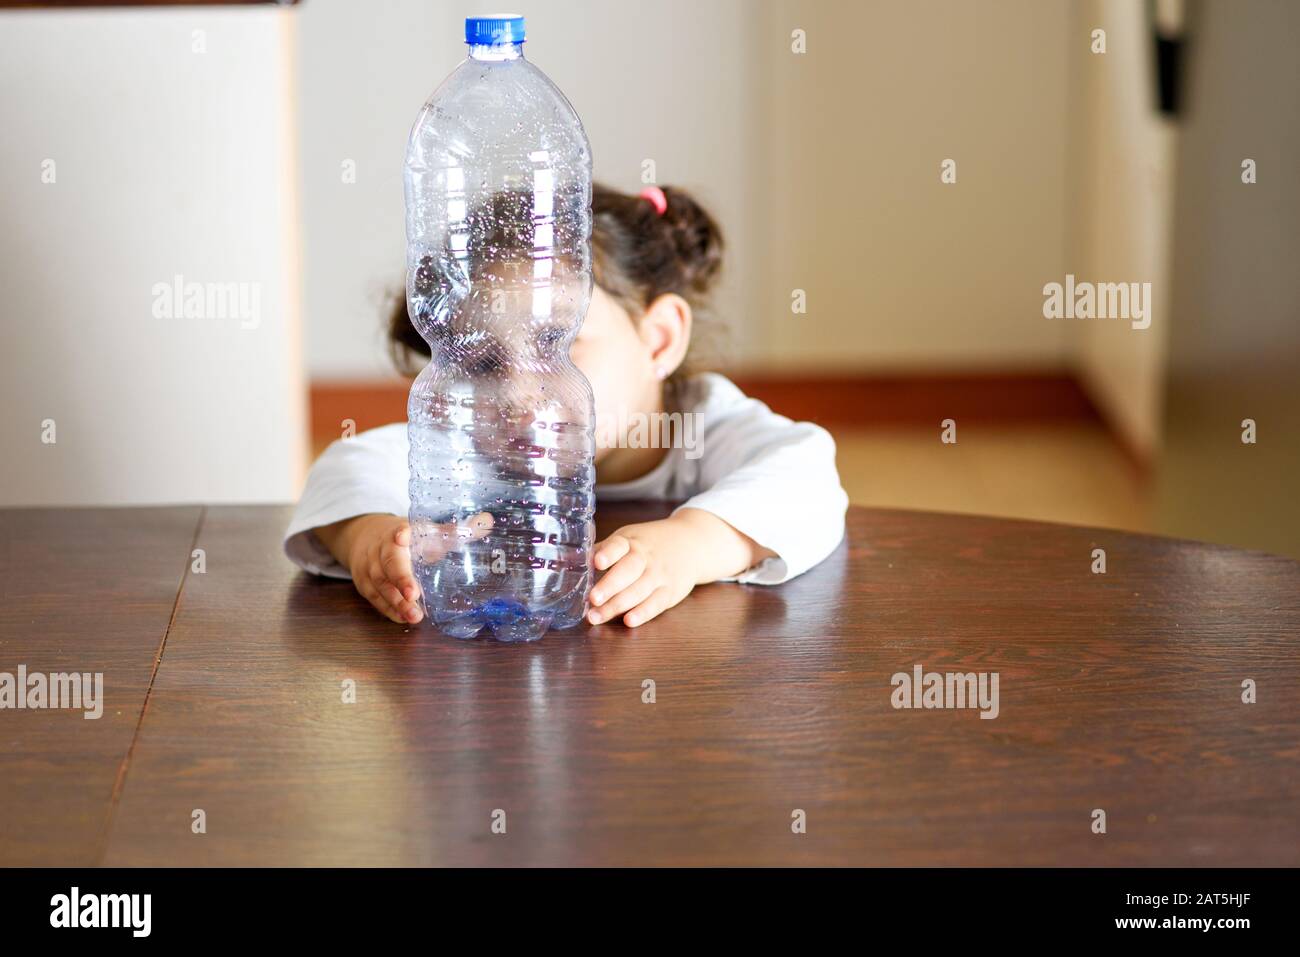 https://c8.alamy.com/comp/2AT5HJF/child-holding-plastic-bottle-concept-of-awareness-of-the-plastic-pollution-world-the-future-for-our-children-2AT5HJF.jpg